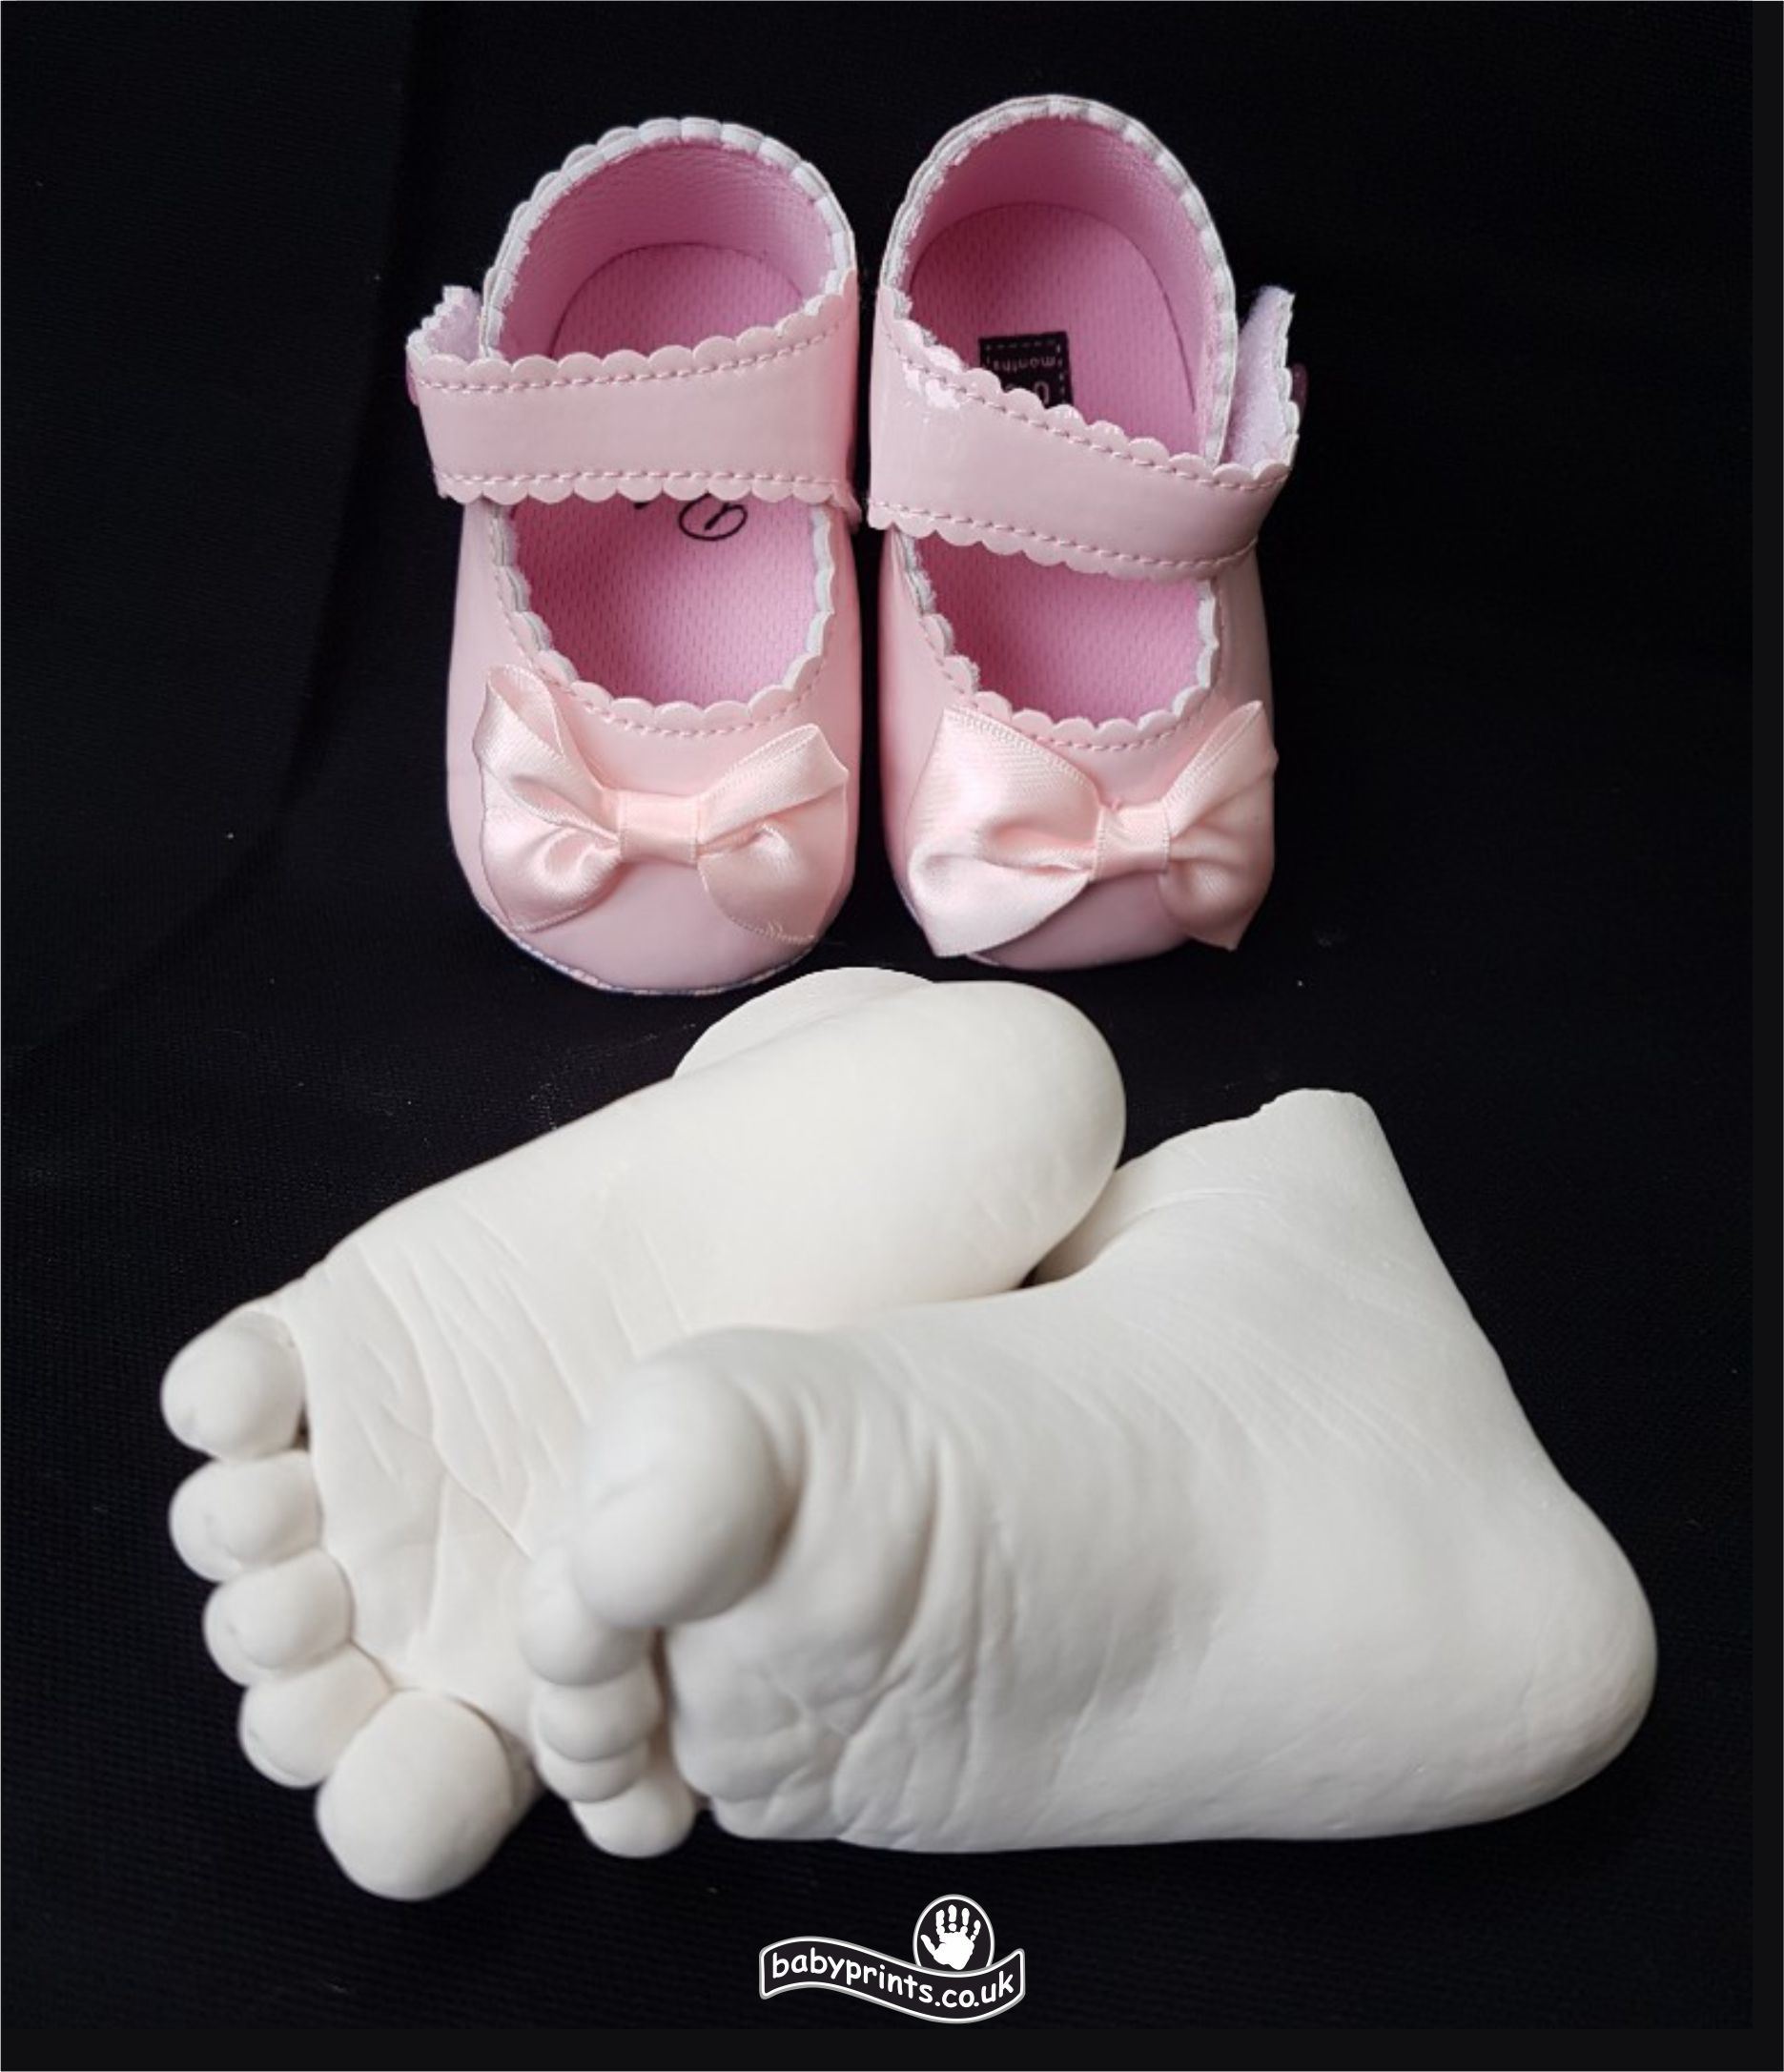 First ballet shoes and feet statues